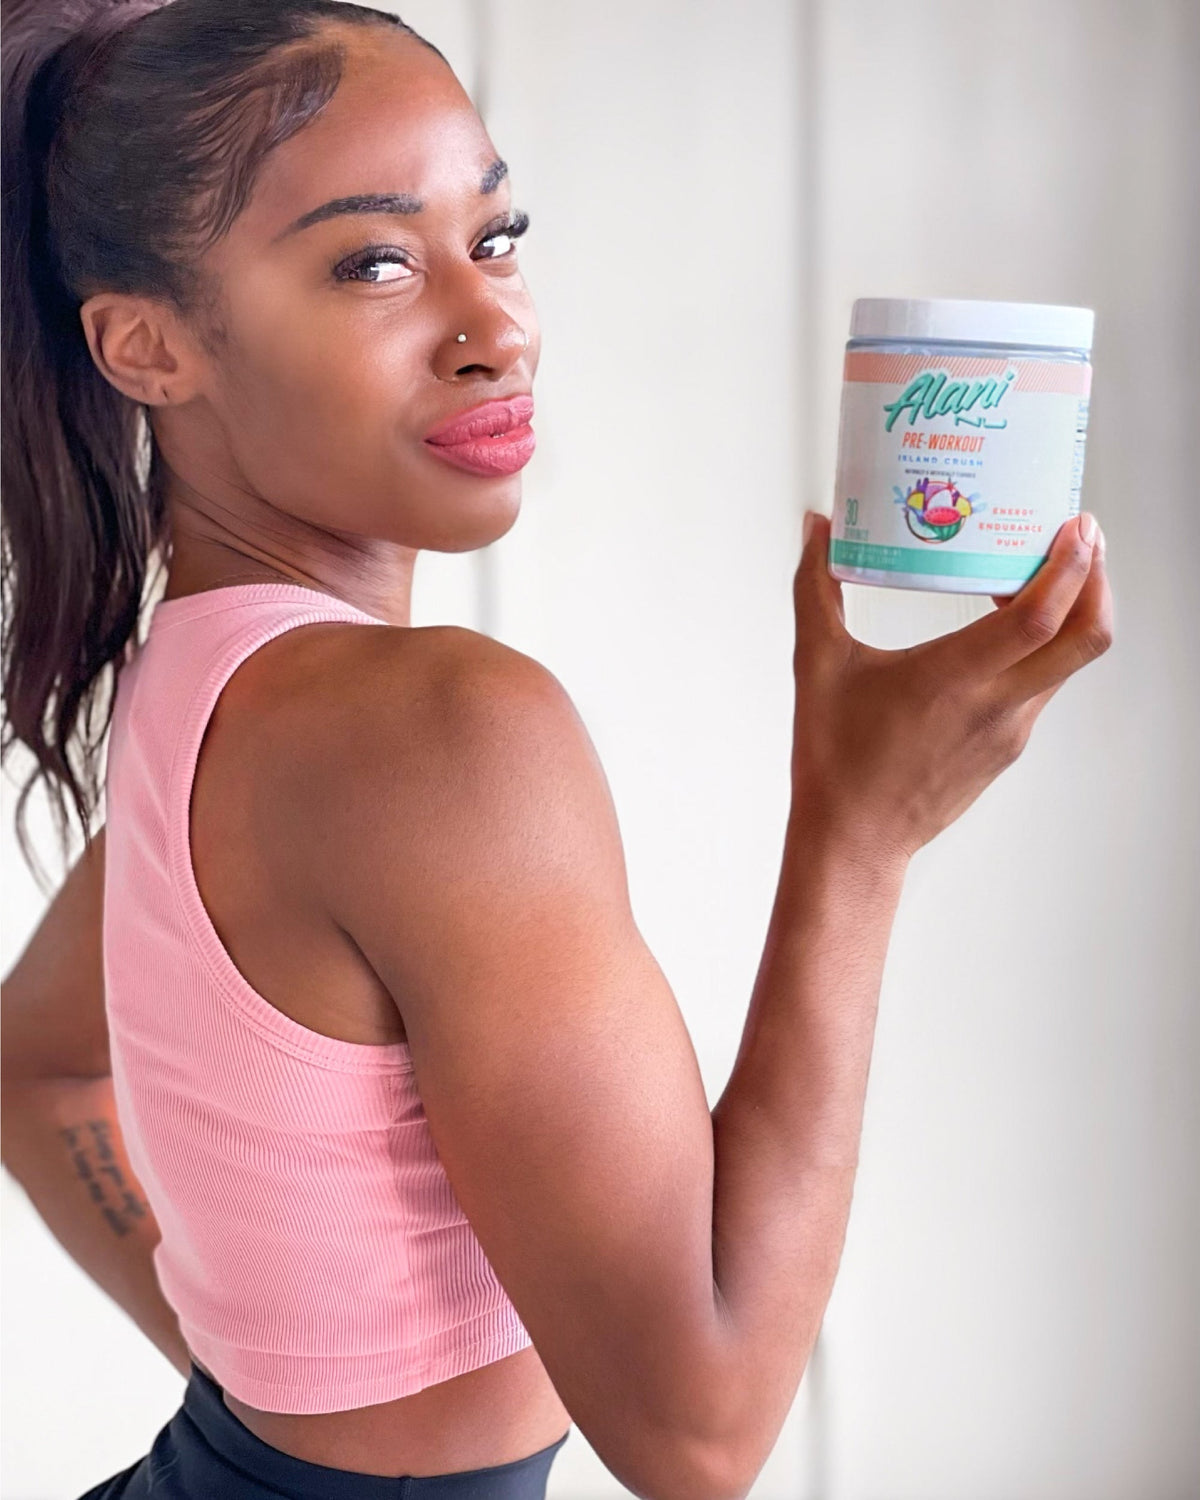 A woman in a pink top holding a container of Pre-Workout in Island Crush flavor.